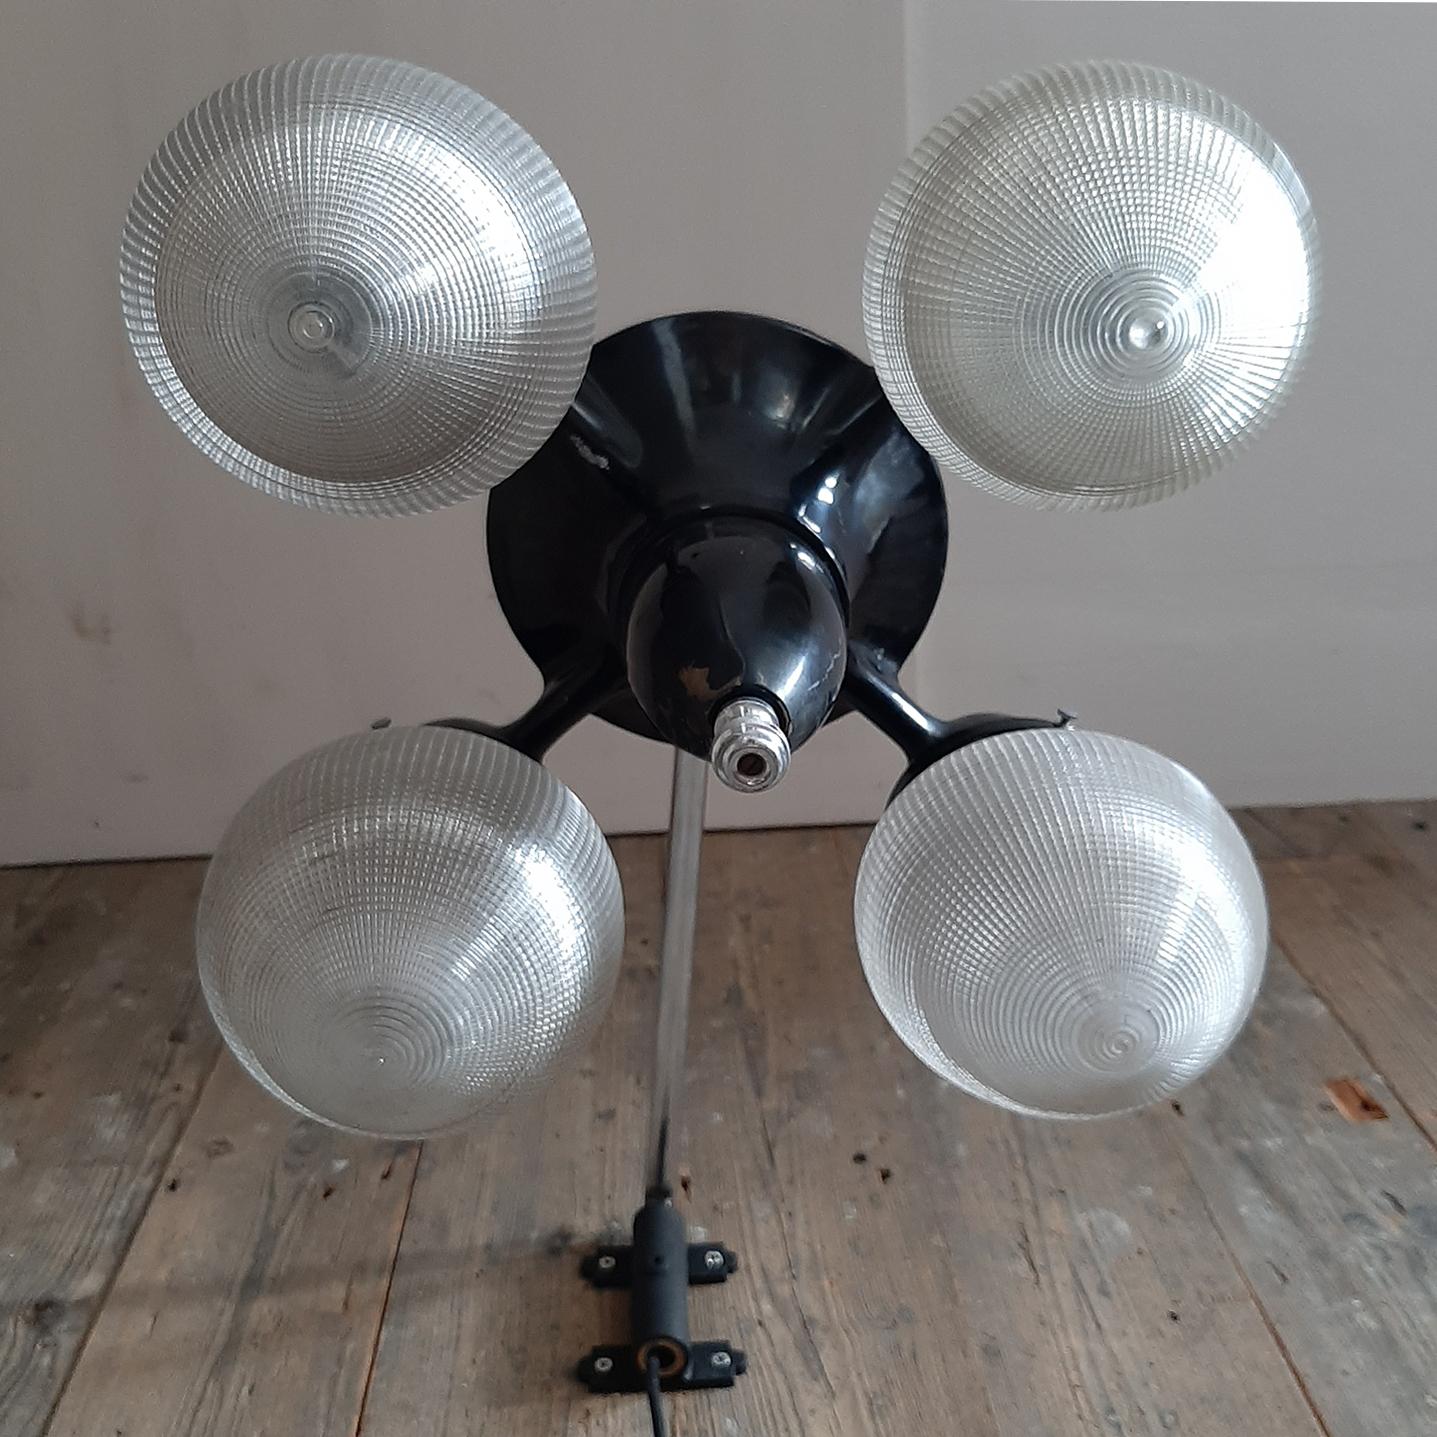 Vintage 1930s Holophane dentist overhead light. Industrial pendant lamp with a black steel body, four arms and four acorn shades. The lamp is fitted on a movable steel arm.

Measurements lamp: 28 x 40 x 40 cm
Measurements arm: 18 x 50 cm.